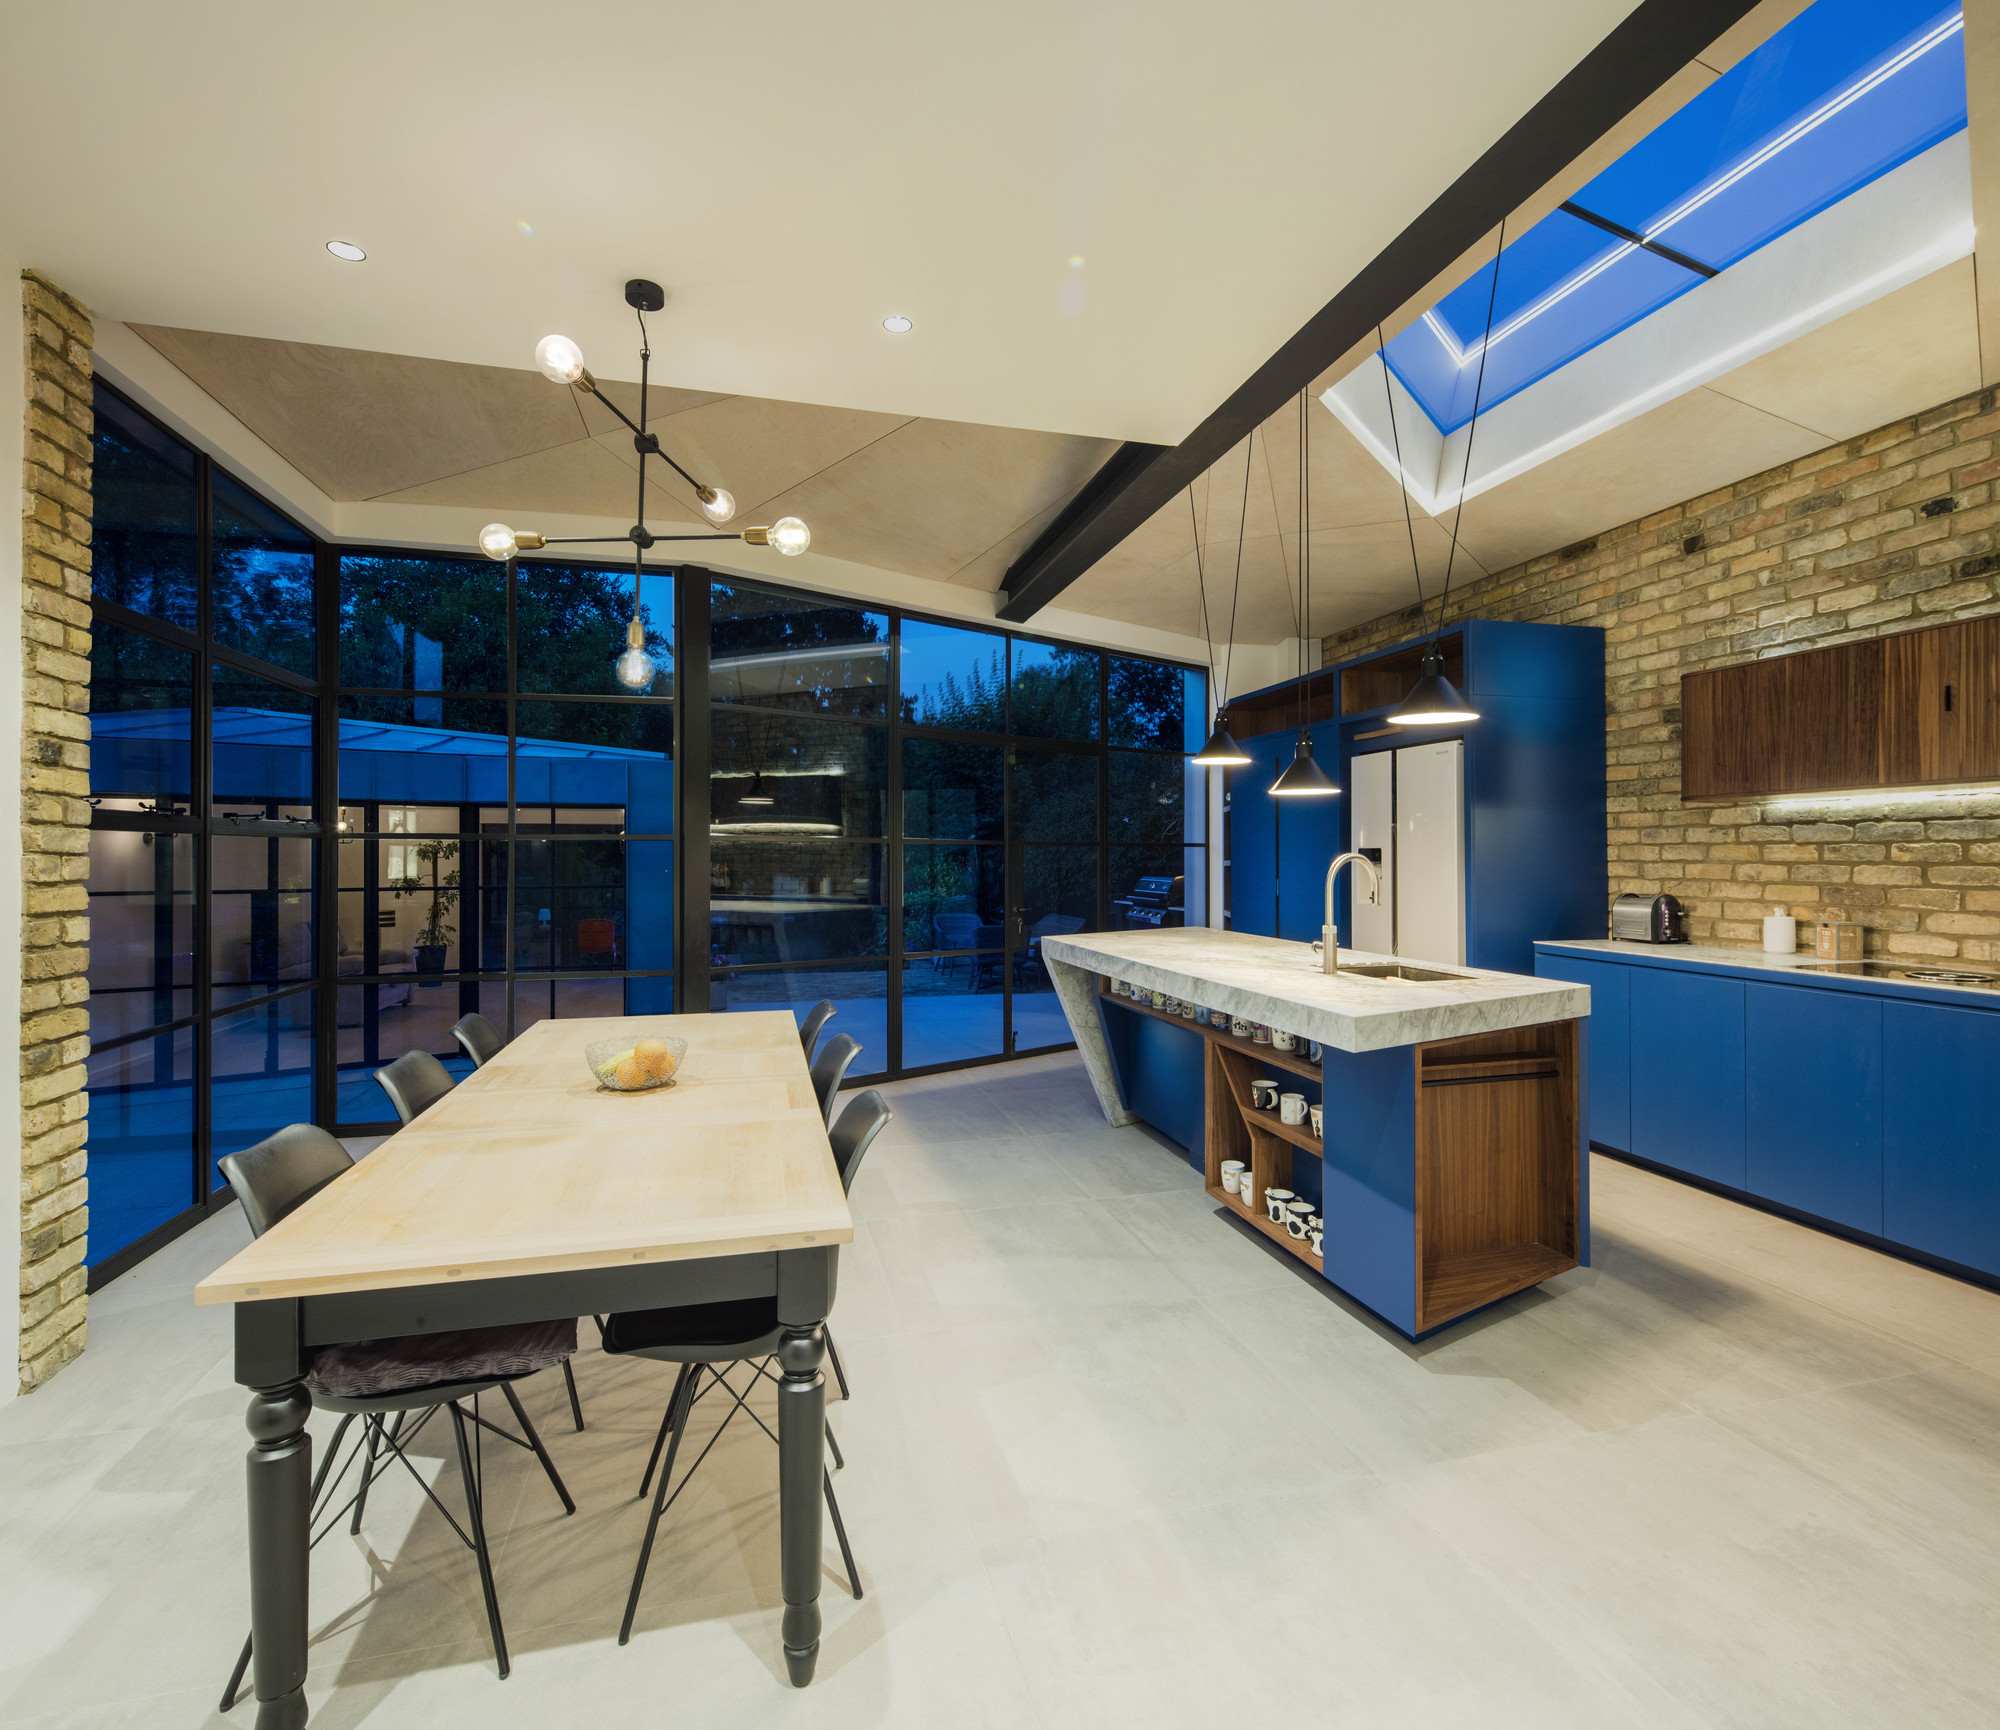 Blue-makes-the-biggest-impression-inside-the-new-kitchen-and-dining-area-76965